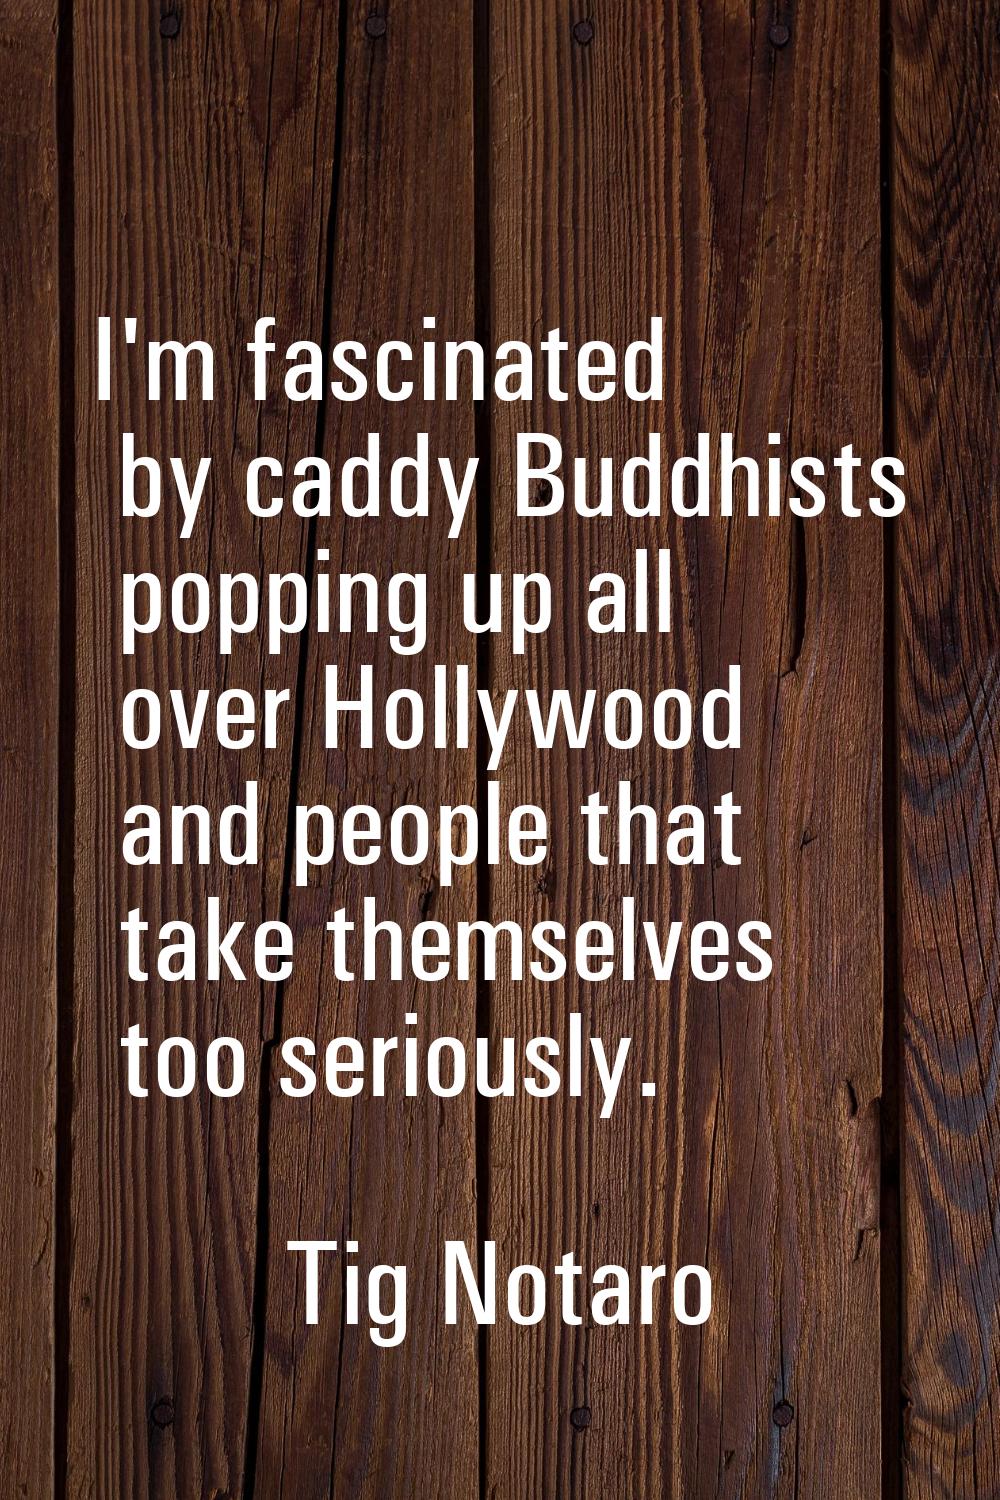 I'm fascinated by caddy Buddhists popping up all over Hollywood and people that take themselves too